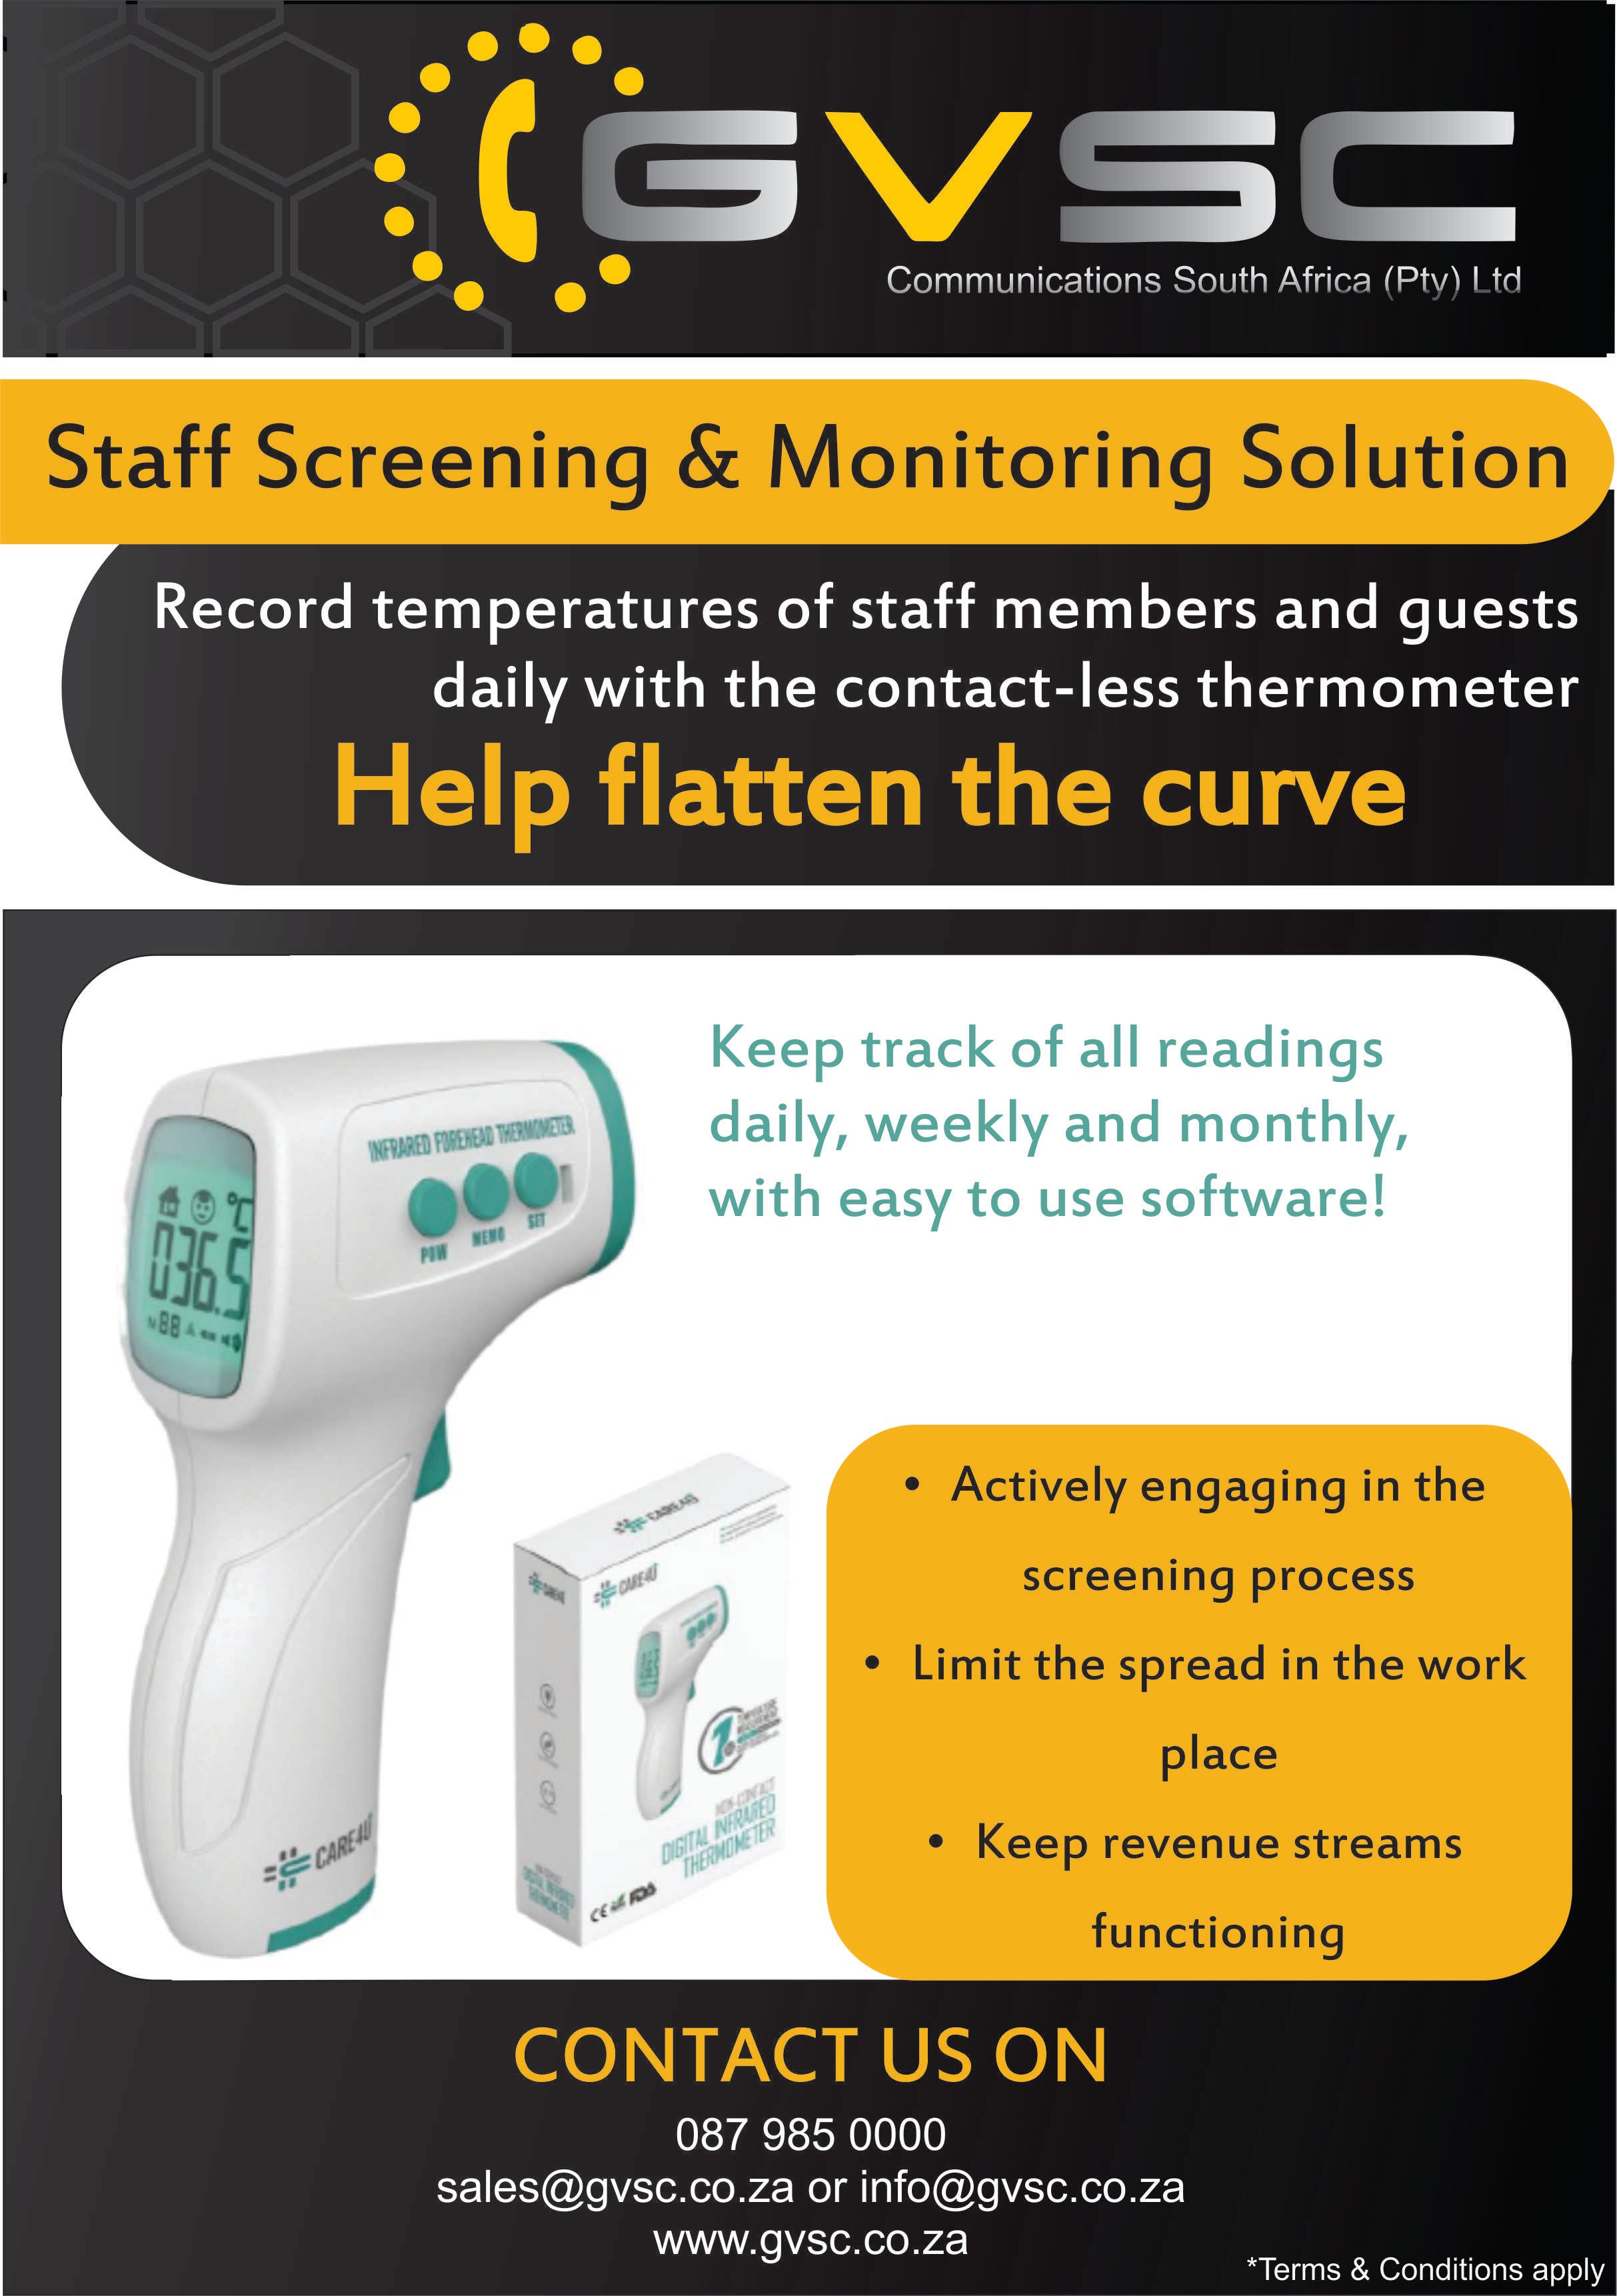 GVSC Staff Screening Solution with Handheld Thermometer